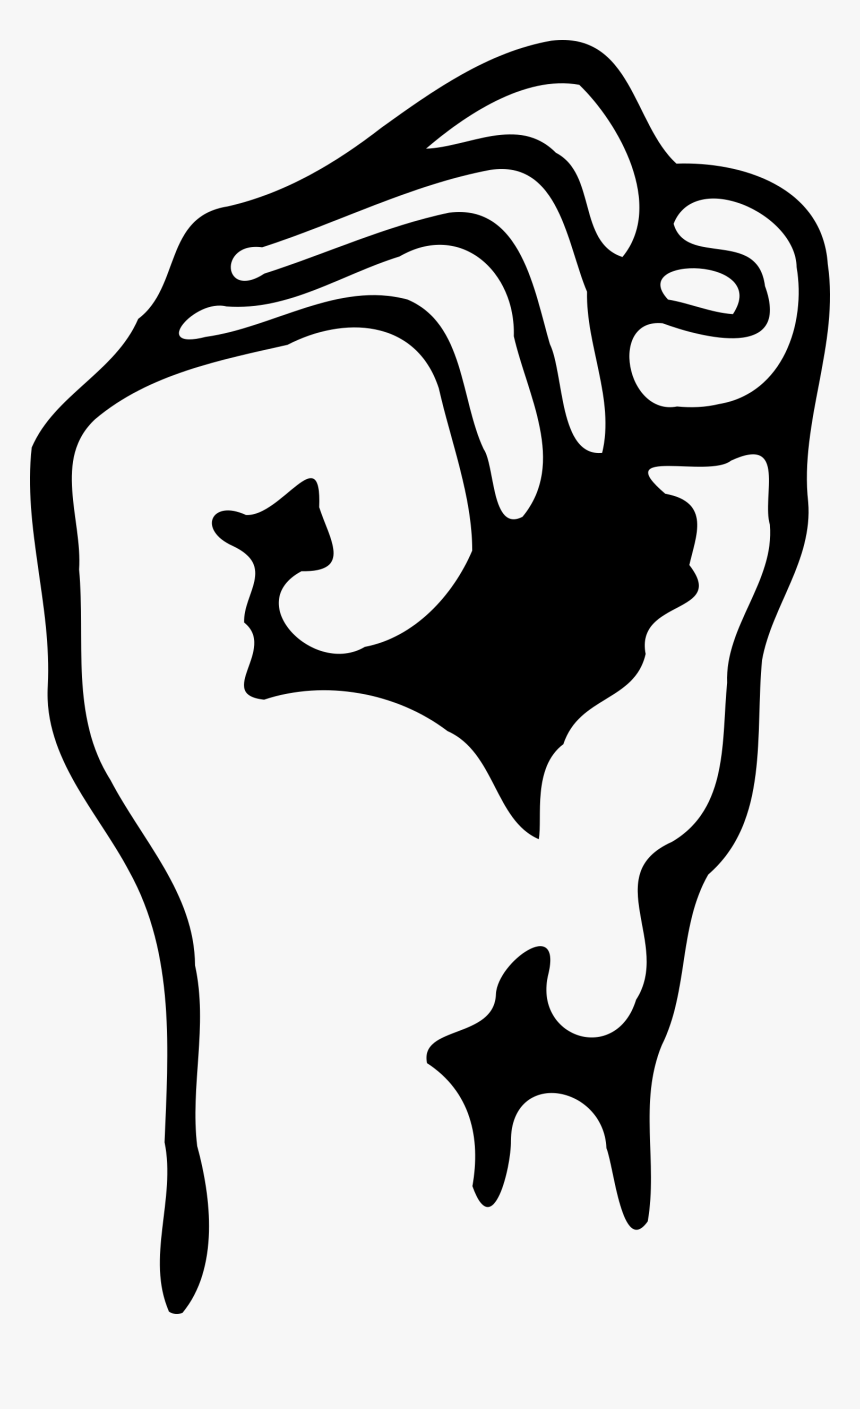 Raised Fist Png, Transparent Png, Free Download